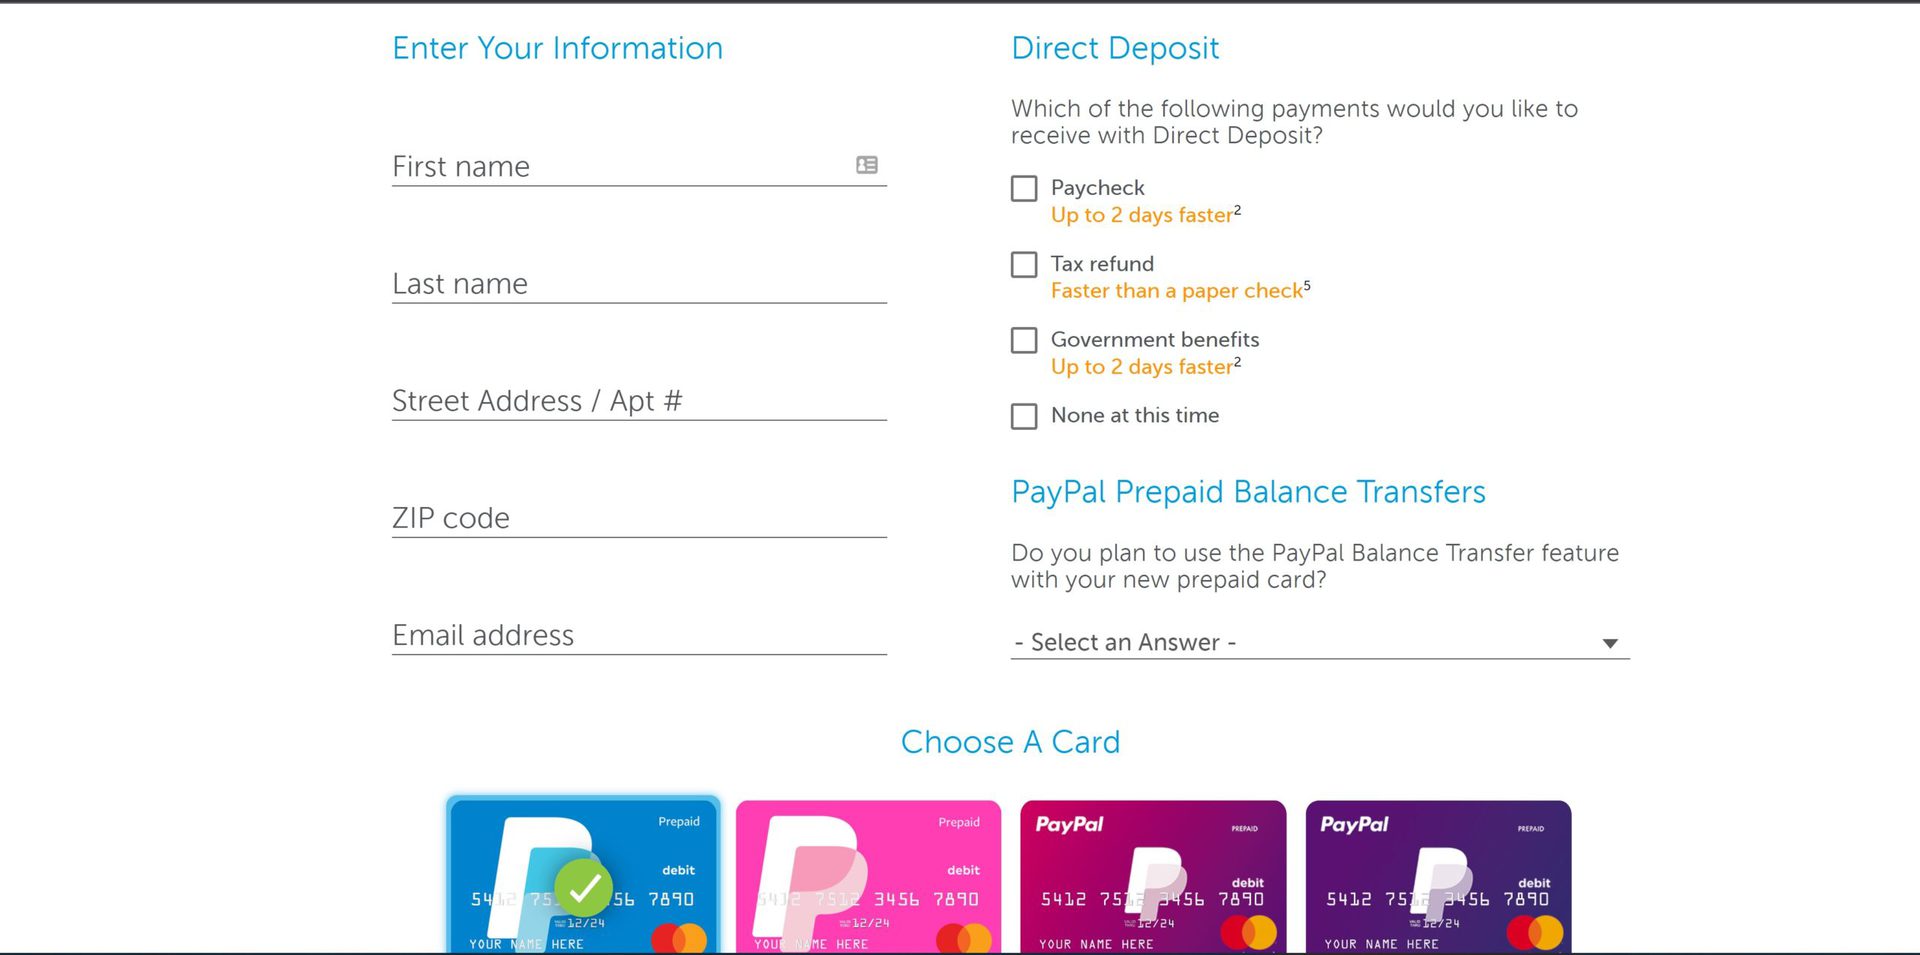 PayPal Prepaid Mastercard review: Should you get one? - Wise